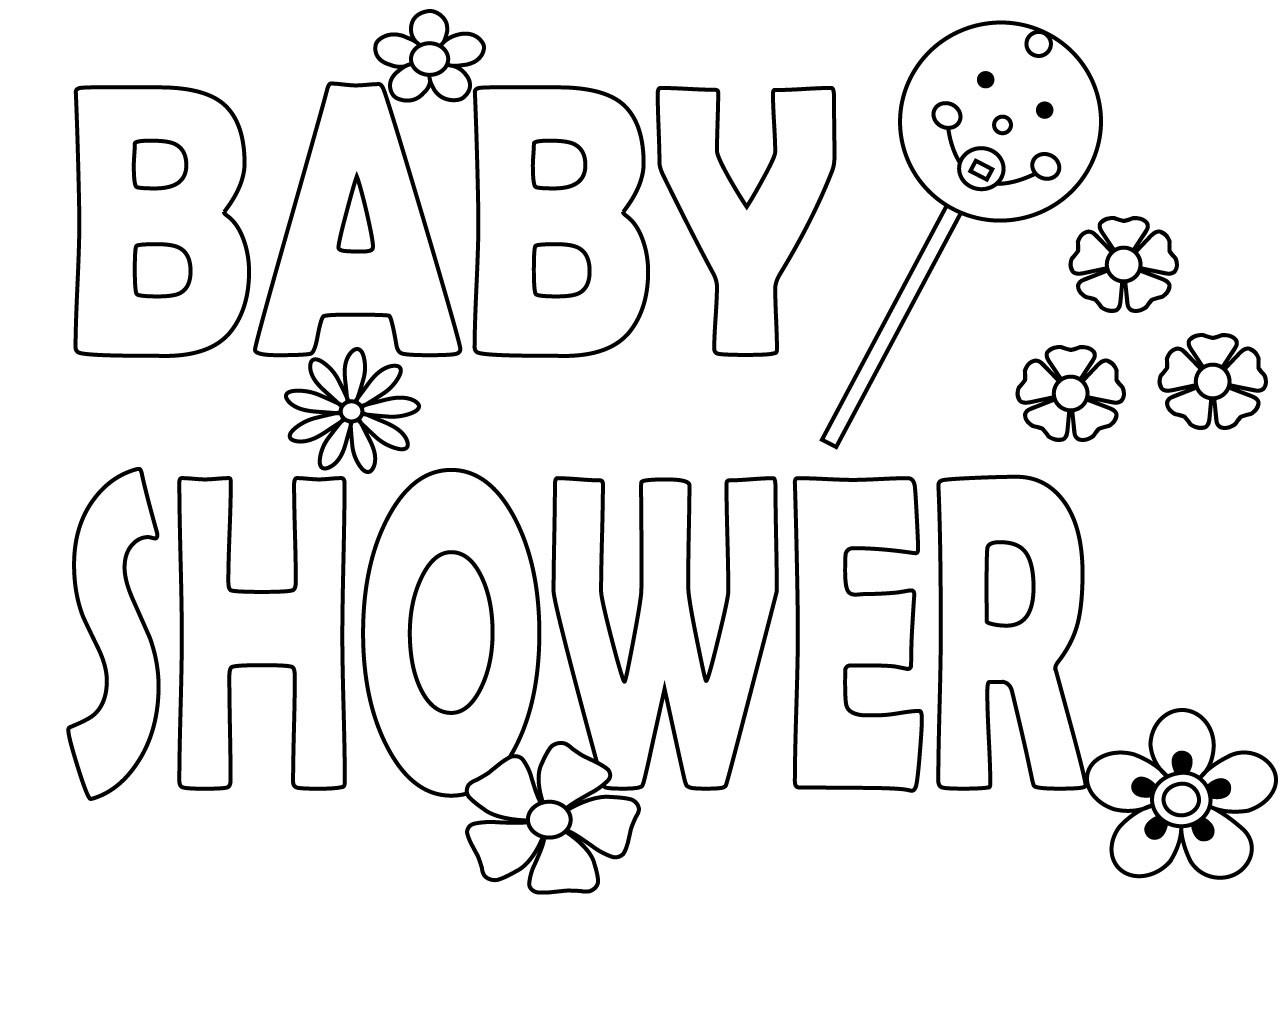 Baby Shower Coloring Book
 CareersPlay Learn Basic English Grammar Step By Step Part 5